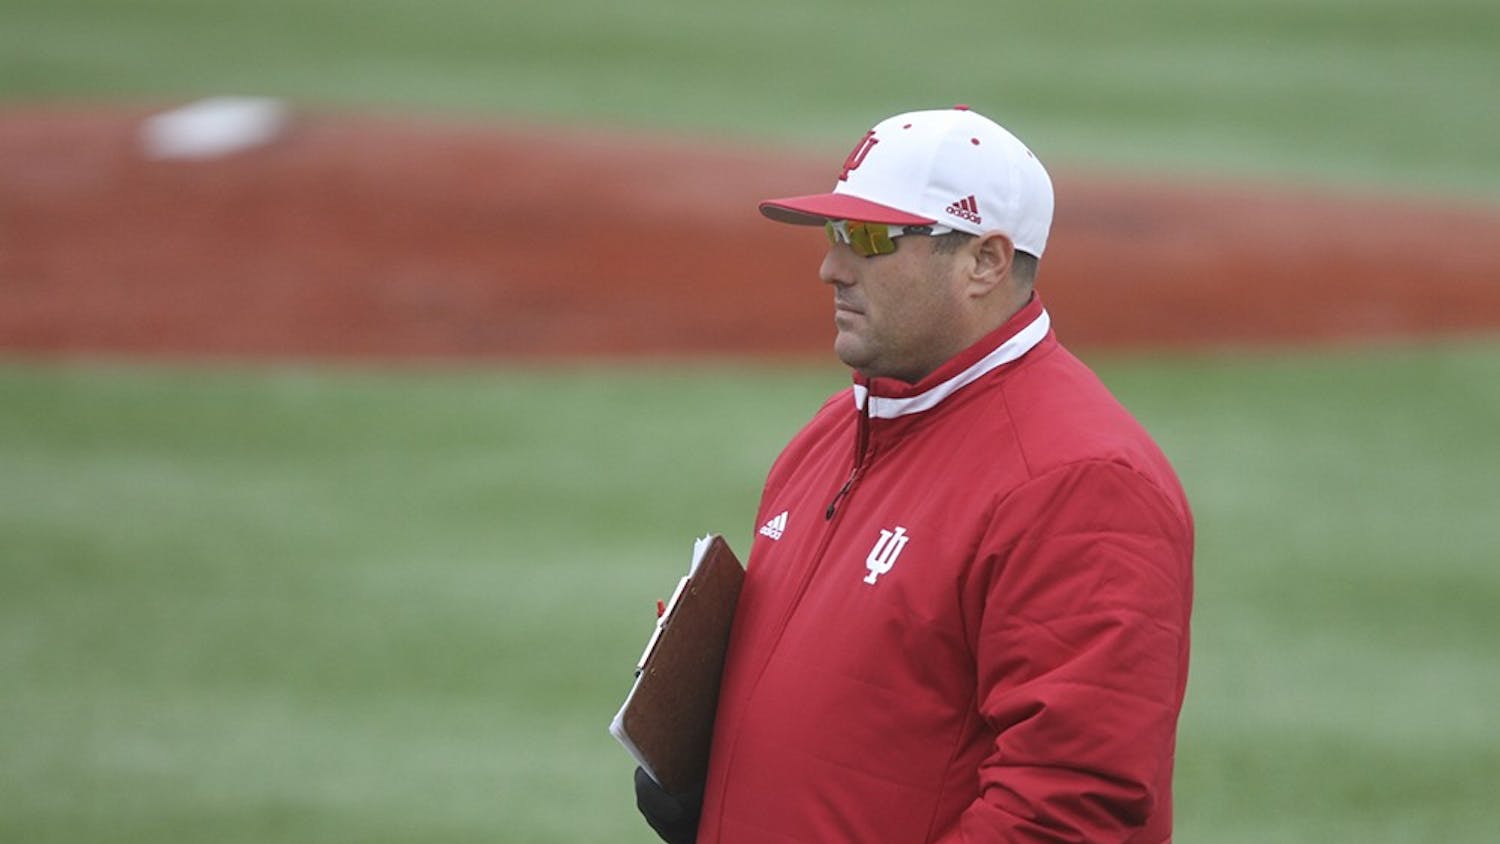 Newly-appointed head coach Chris Lemonis monitors practice on Wednesday at Bart Kaufman Field. IU's first game of the season is at Stanford on Friday.